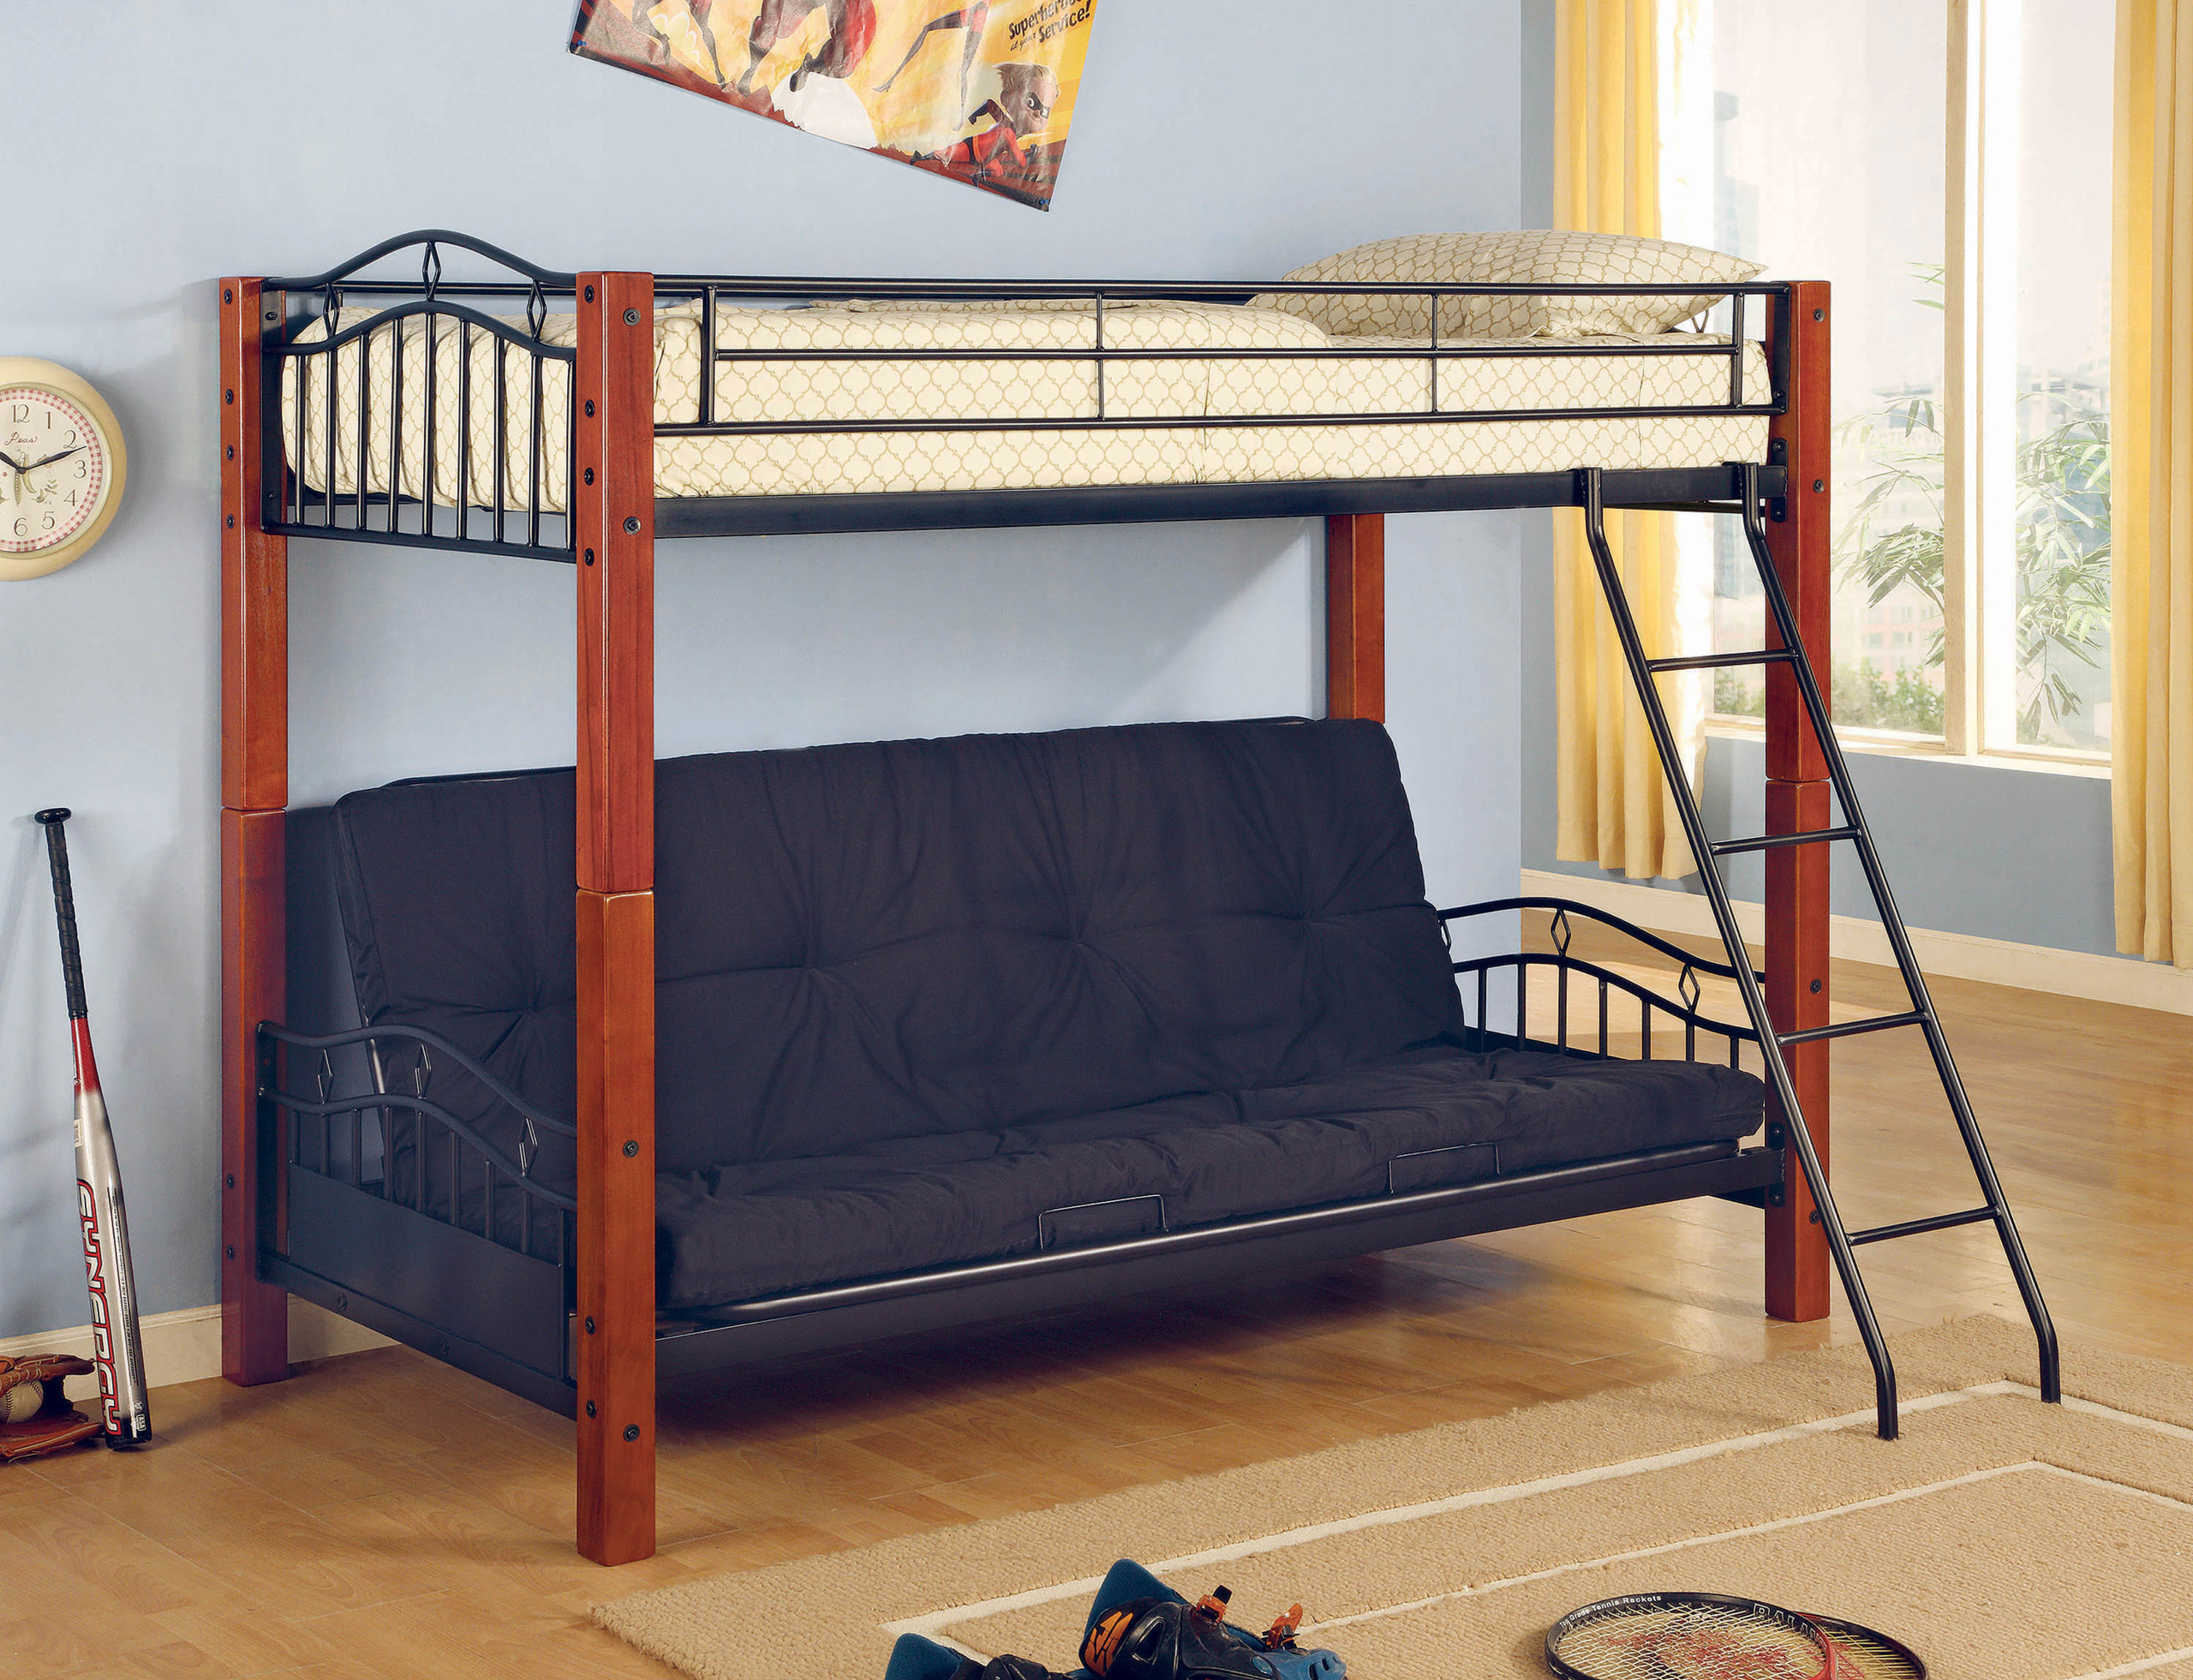 Full Over Futon Bunk Bed Visualhunt, Twin Over Futon Bunk Bed Big Lots